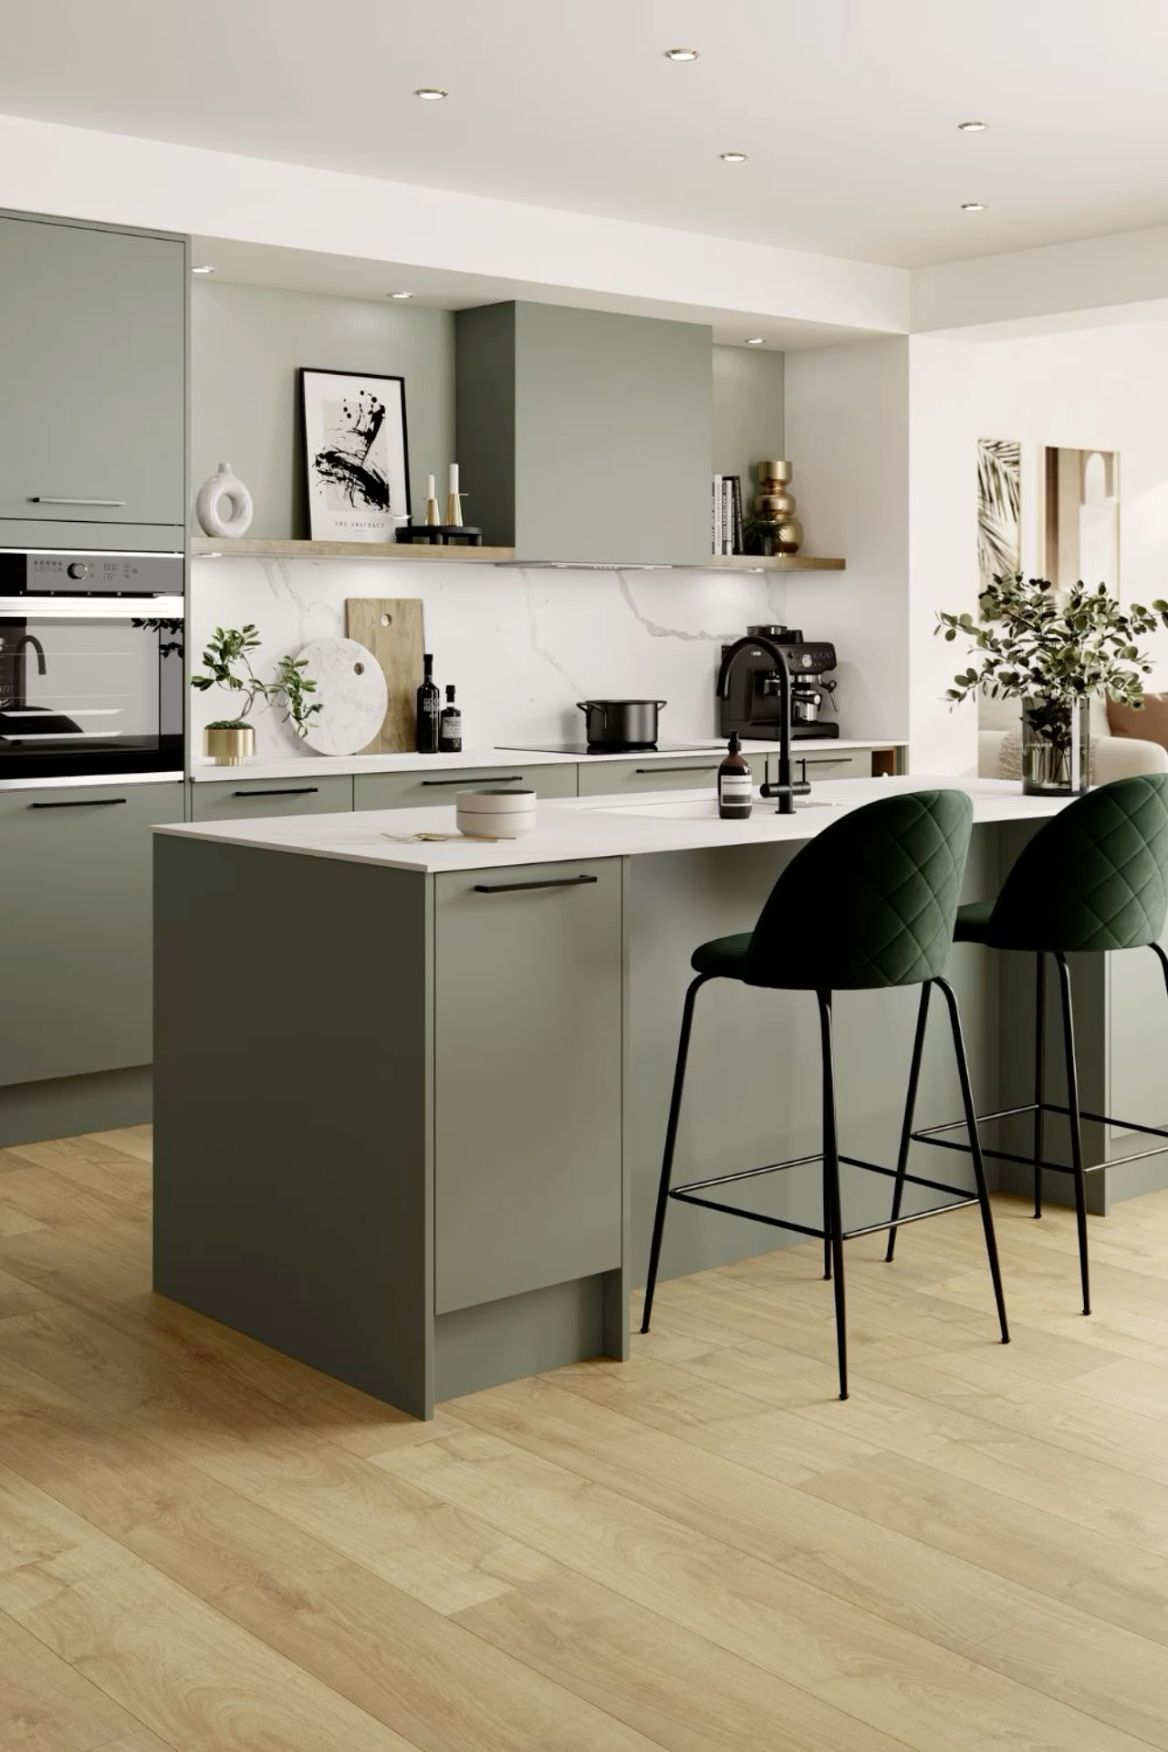 Sustainable and Stylish: How to Create a Green Kitchen for a Healthier Home